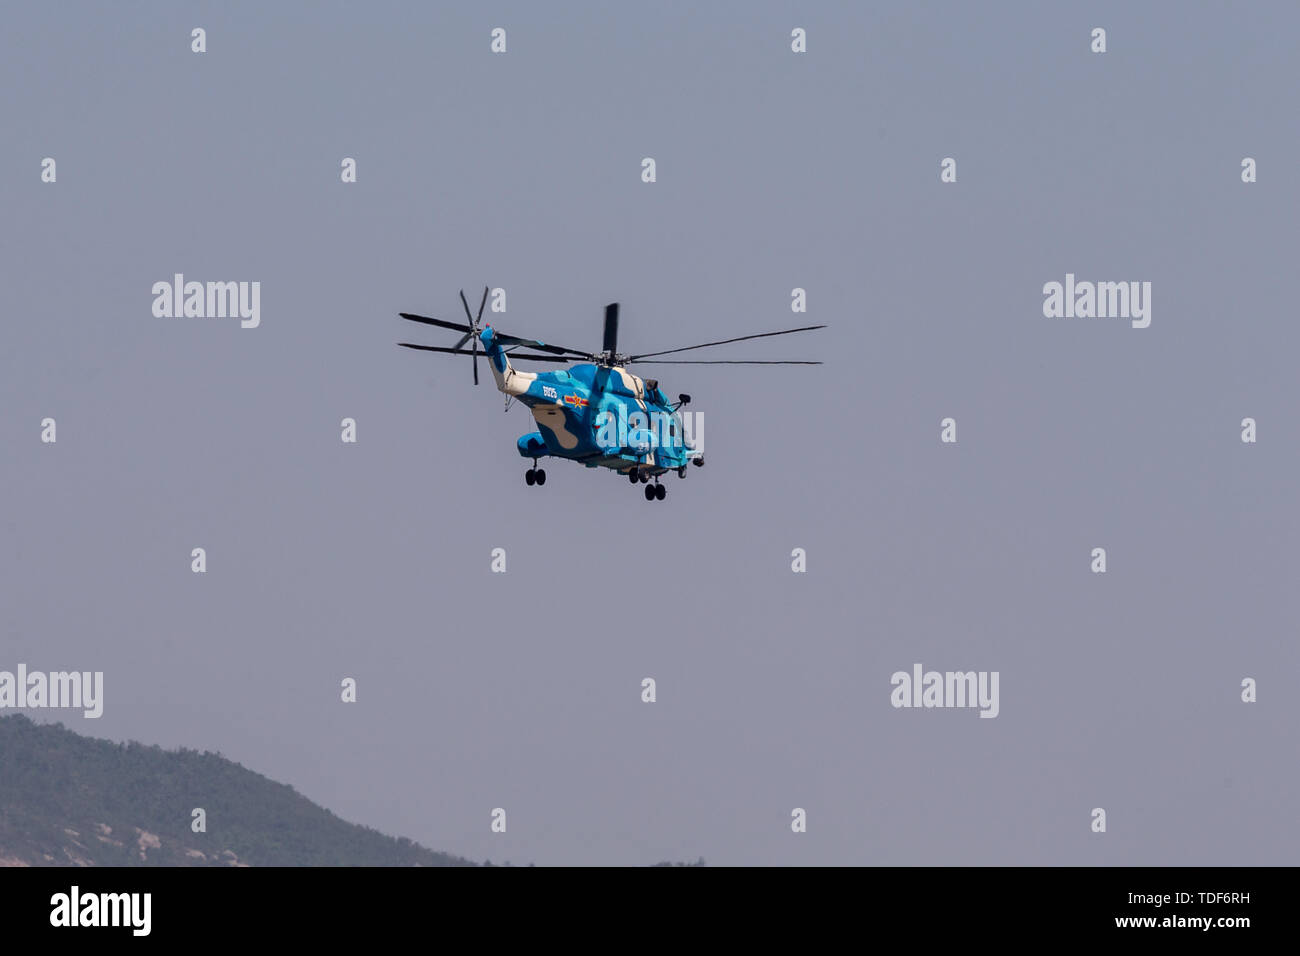 China Air Force direct-8 helicopter helicopter flies to Zhuhai to prepare for the 2018 Zhuhai Air Show, China's Zhuhai Jinwan Airport Air Show Center, October 30, 2018. Stock Photo